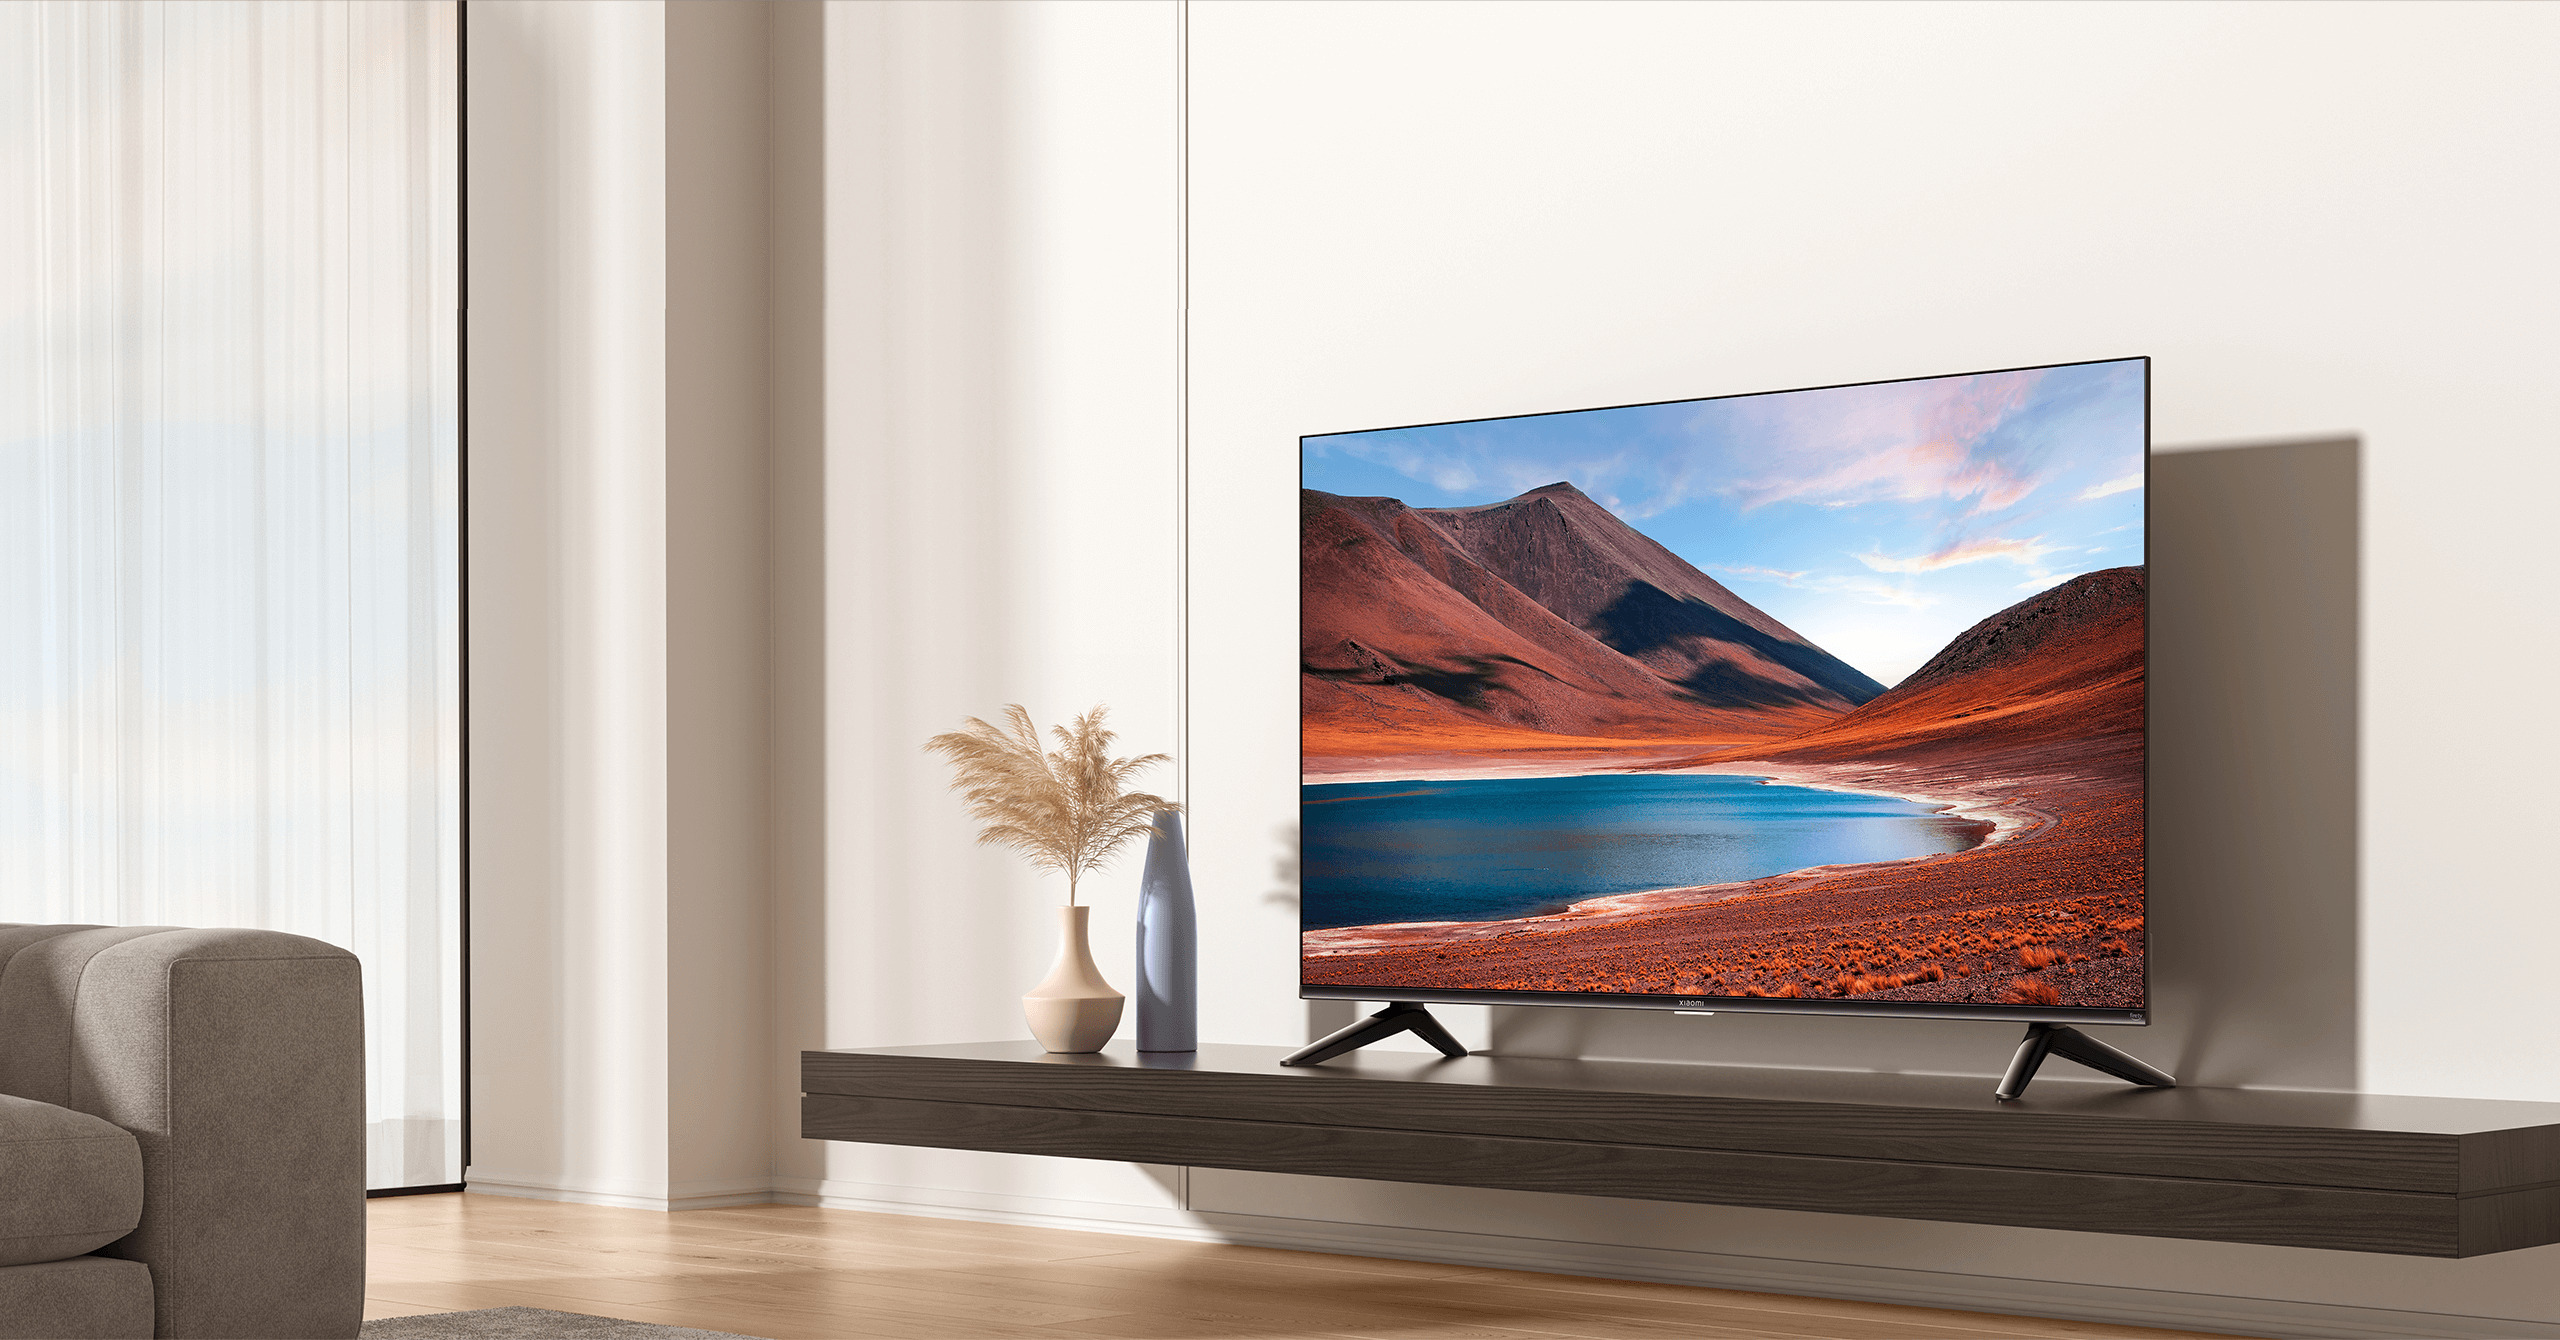 Xiaomi’s 50-inch 4K TV with built-in Fire TV is sold off on Amazon